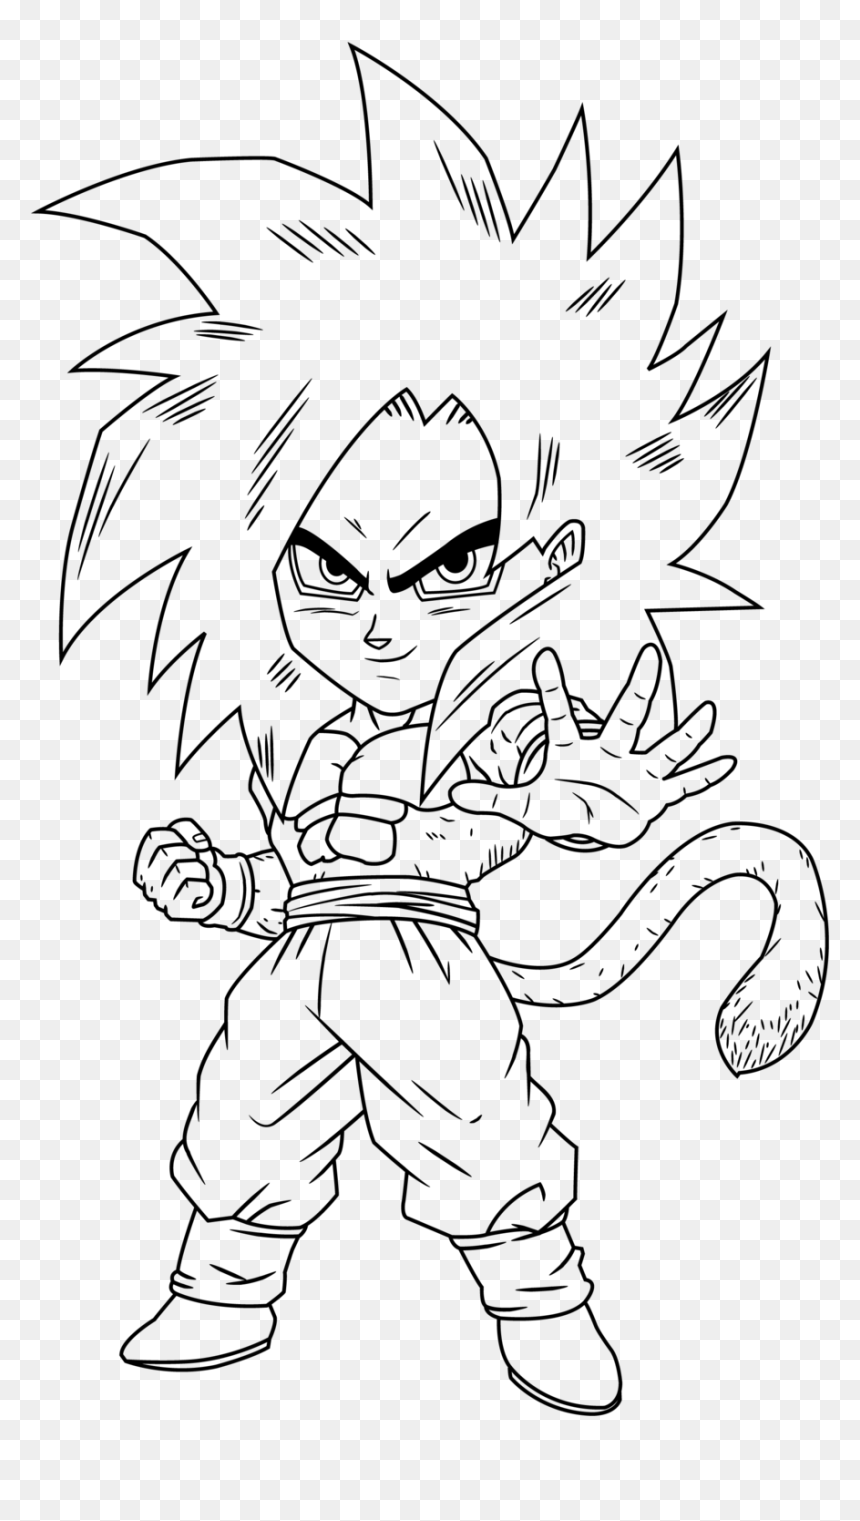 Goku Ssj4 Coloring Pages, HD Png Download - 681x1174 PNG - DLF.PT